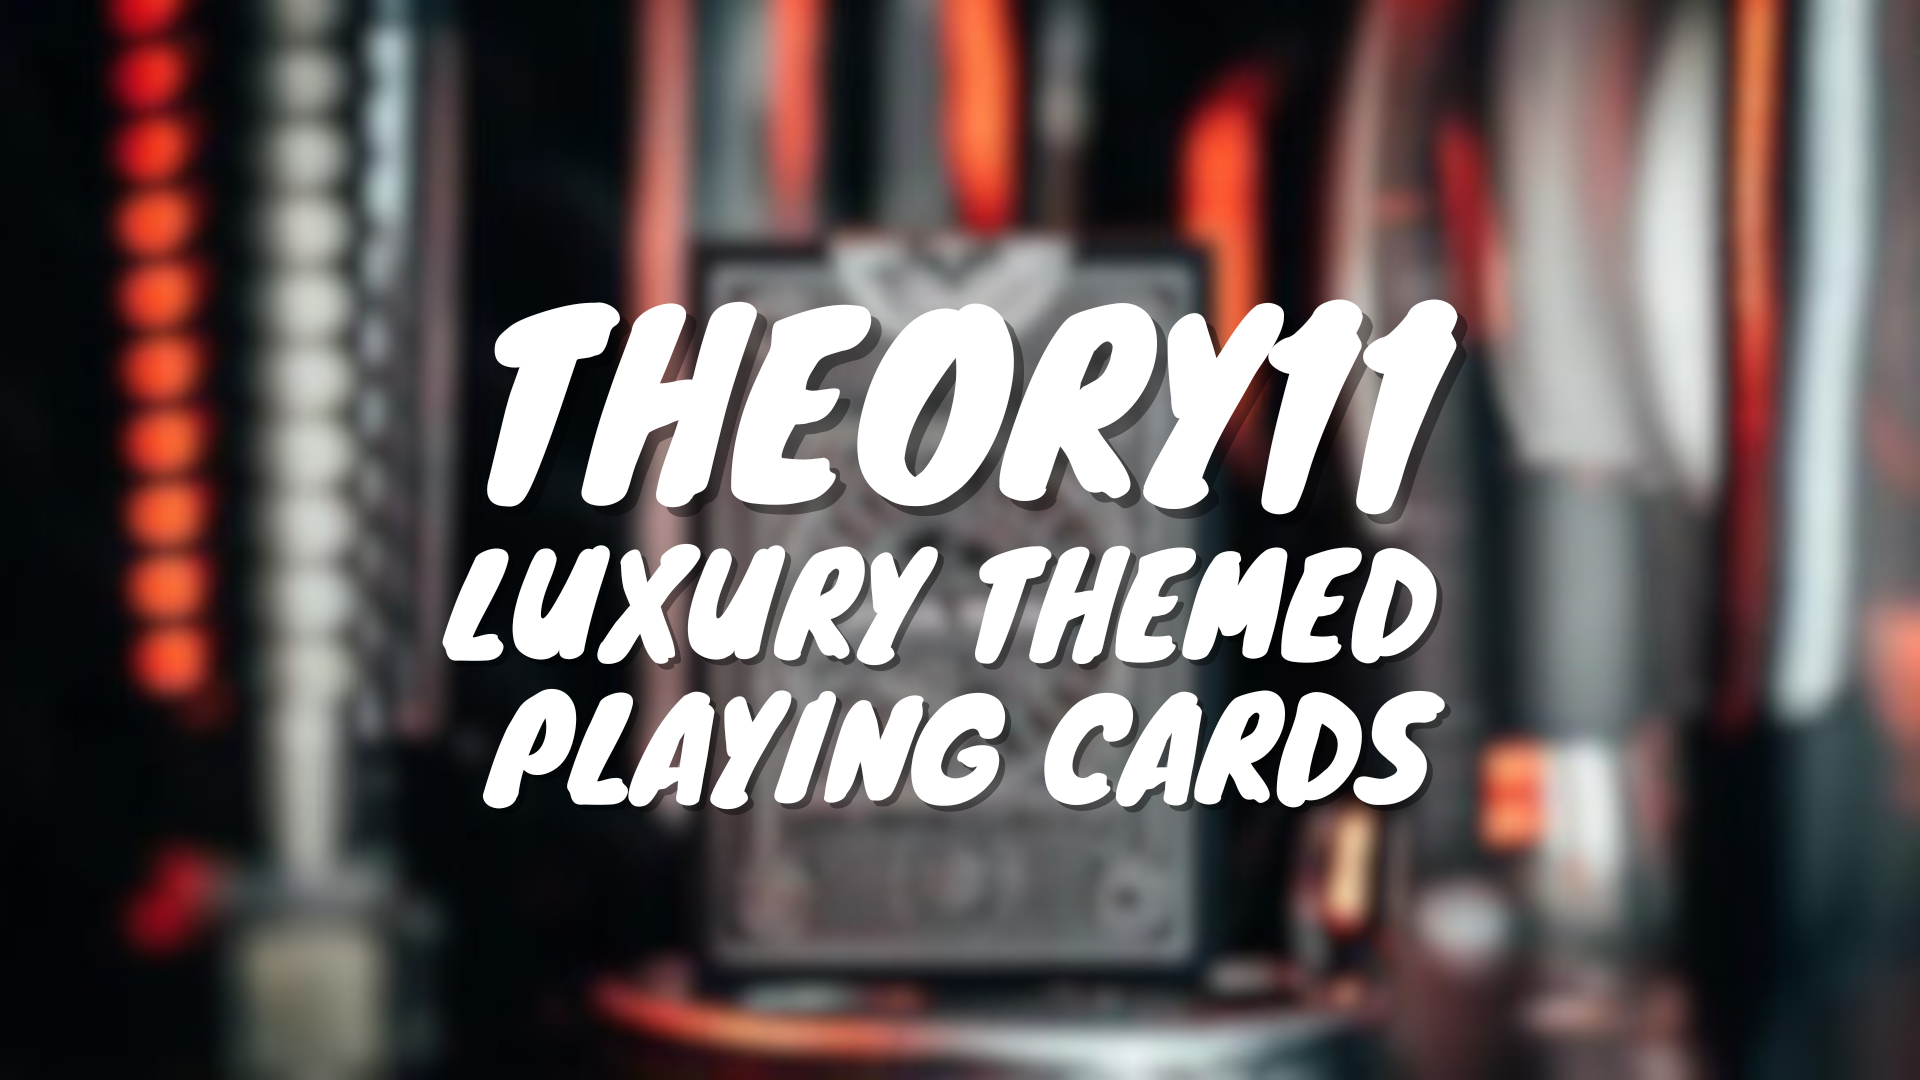 Theory11: Luxury Themed Playing Cards